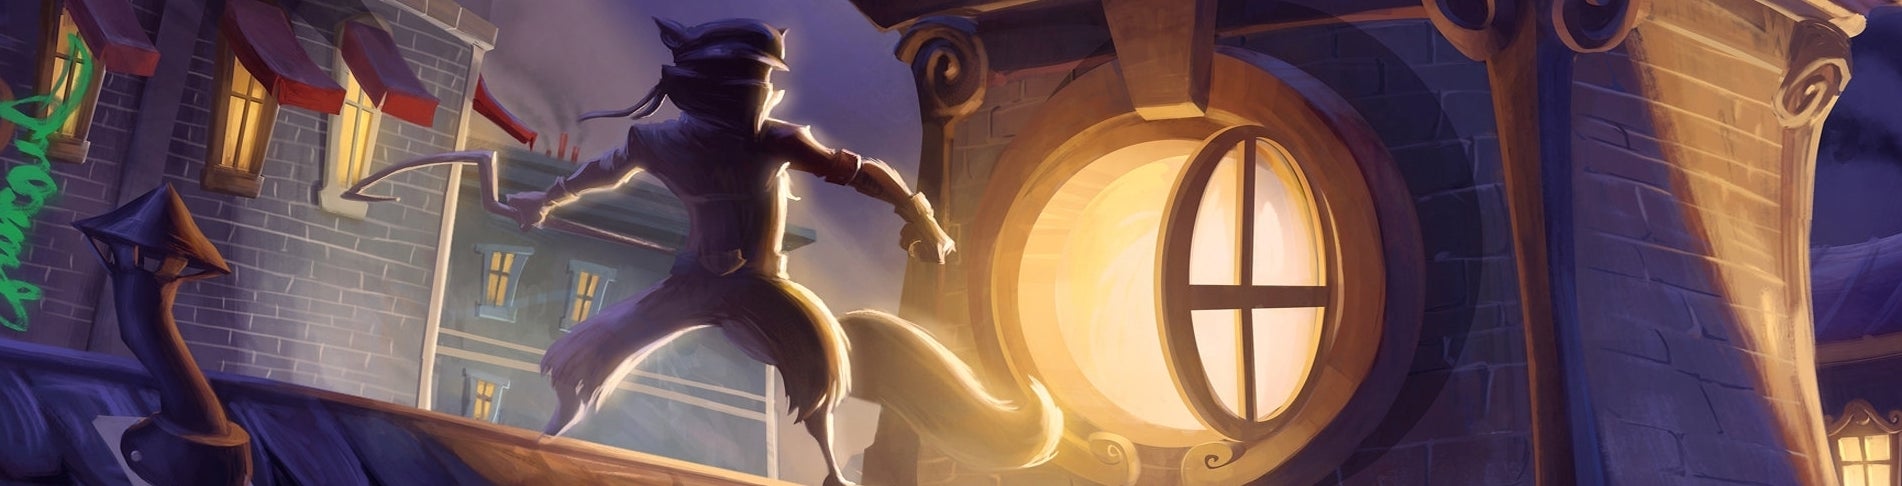 Image for Sly Cooper: Thieves in Time review